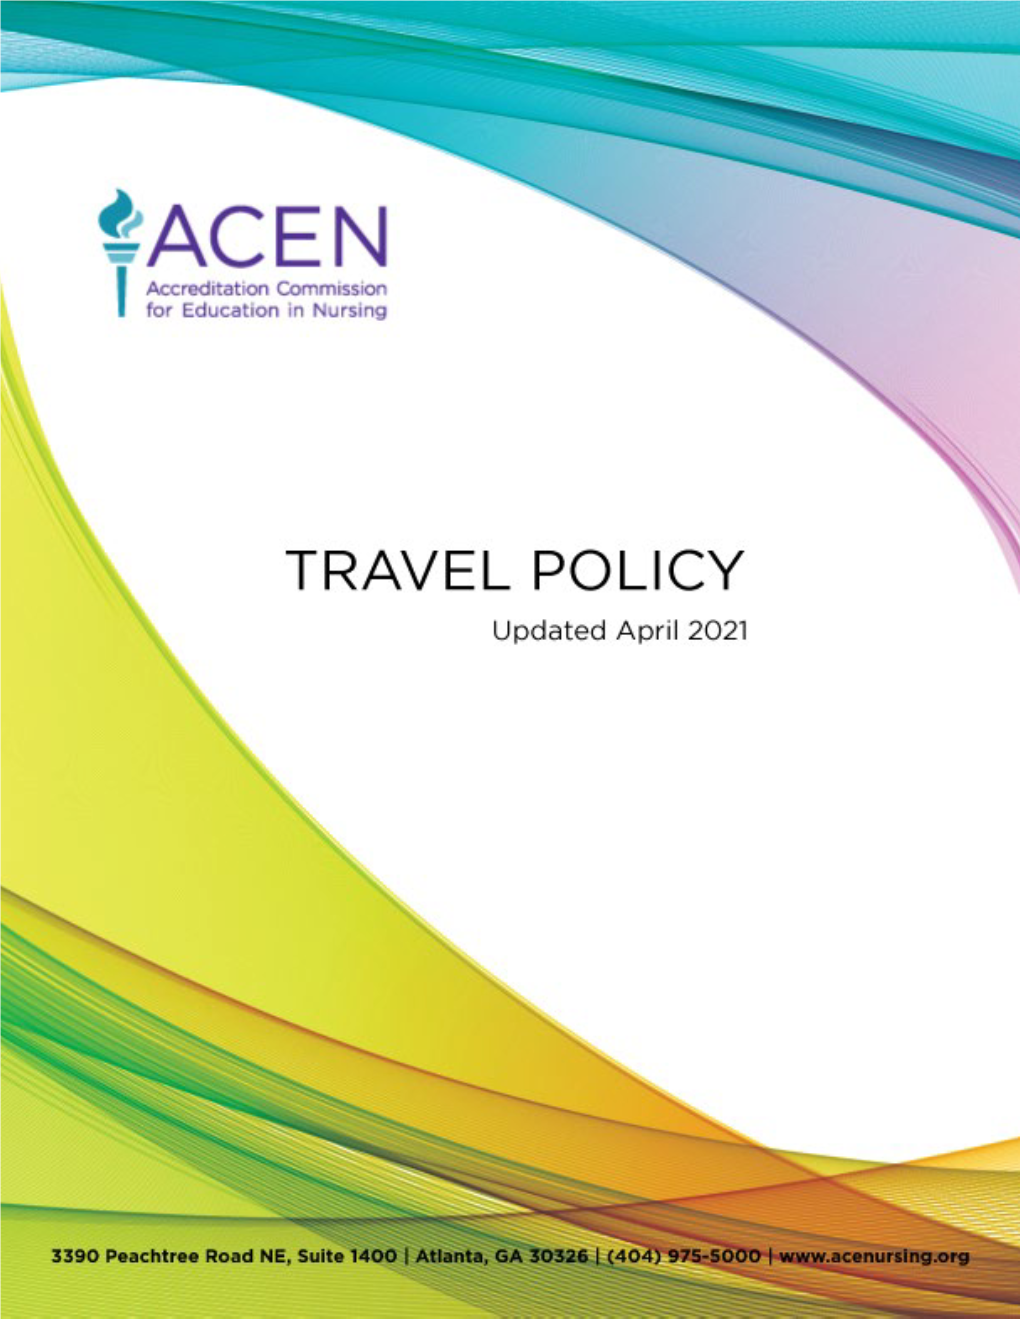 ACEN Travel Policy